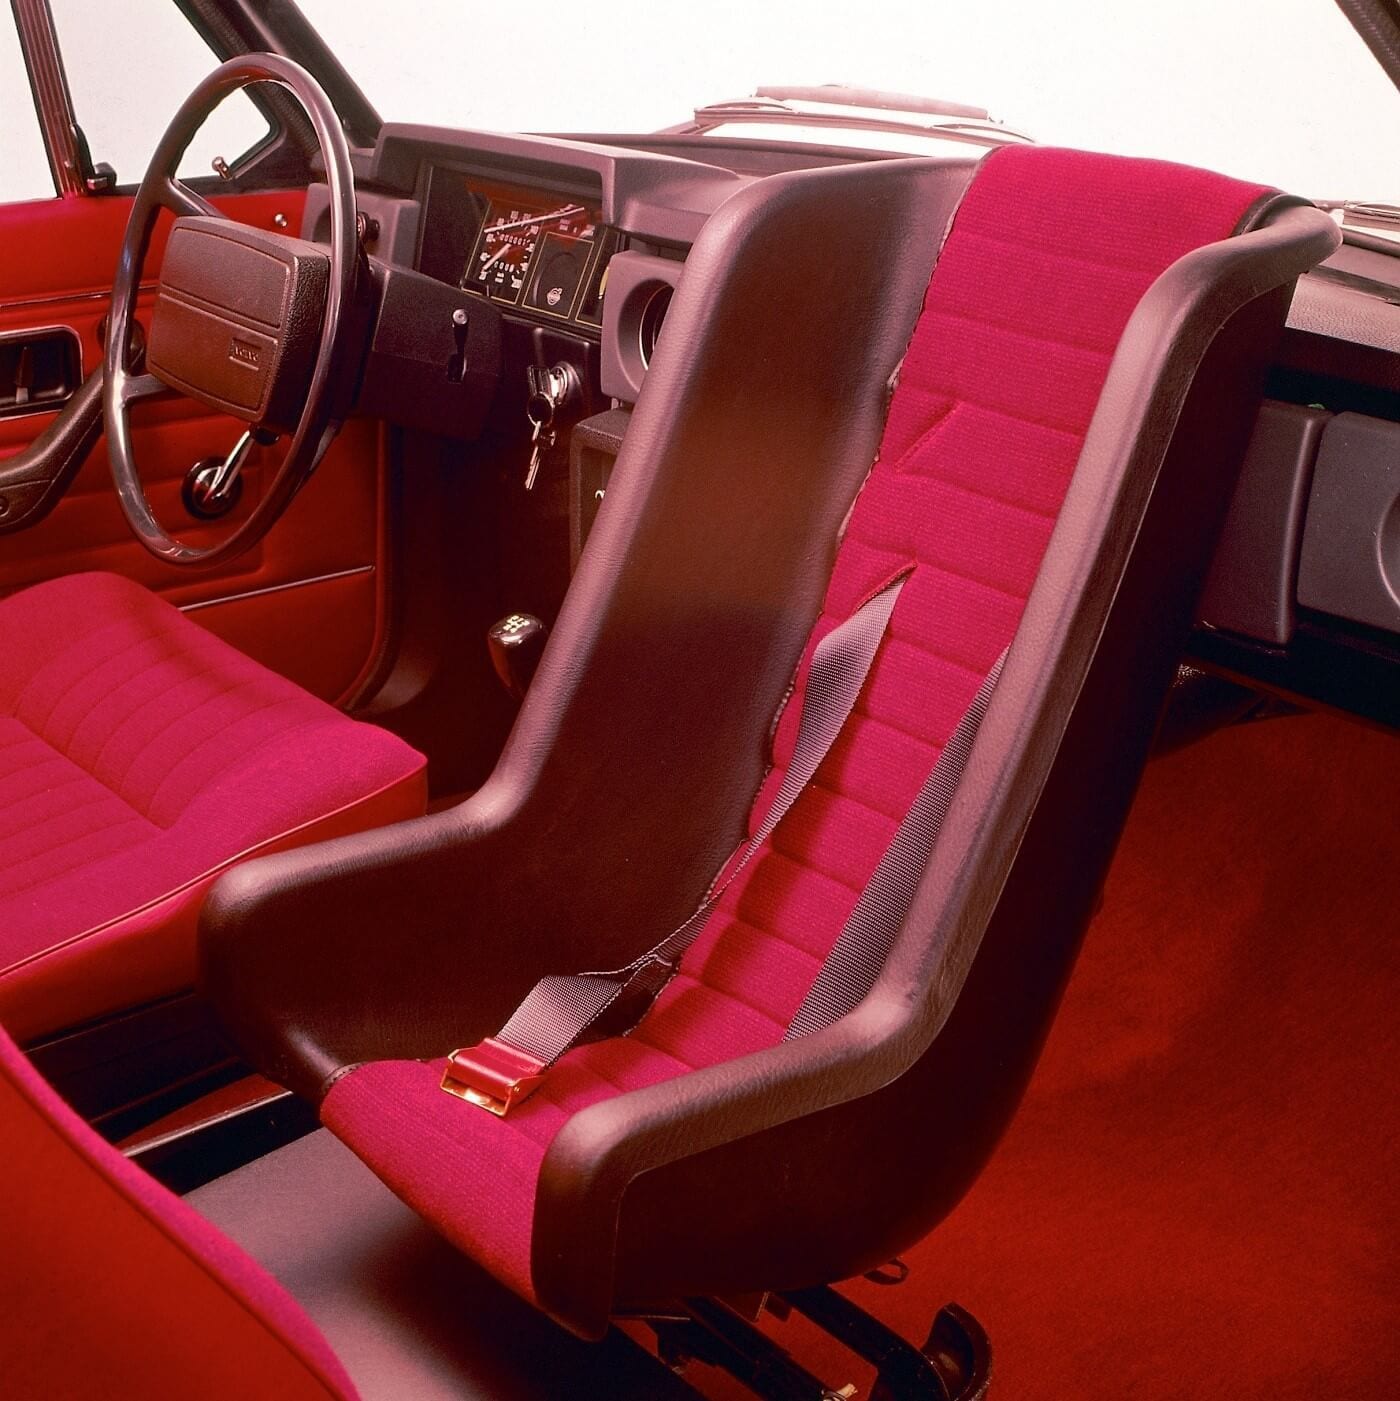 In 1972 Volvo Cars launched the industry-first rear-facing child seat.